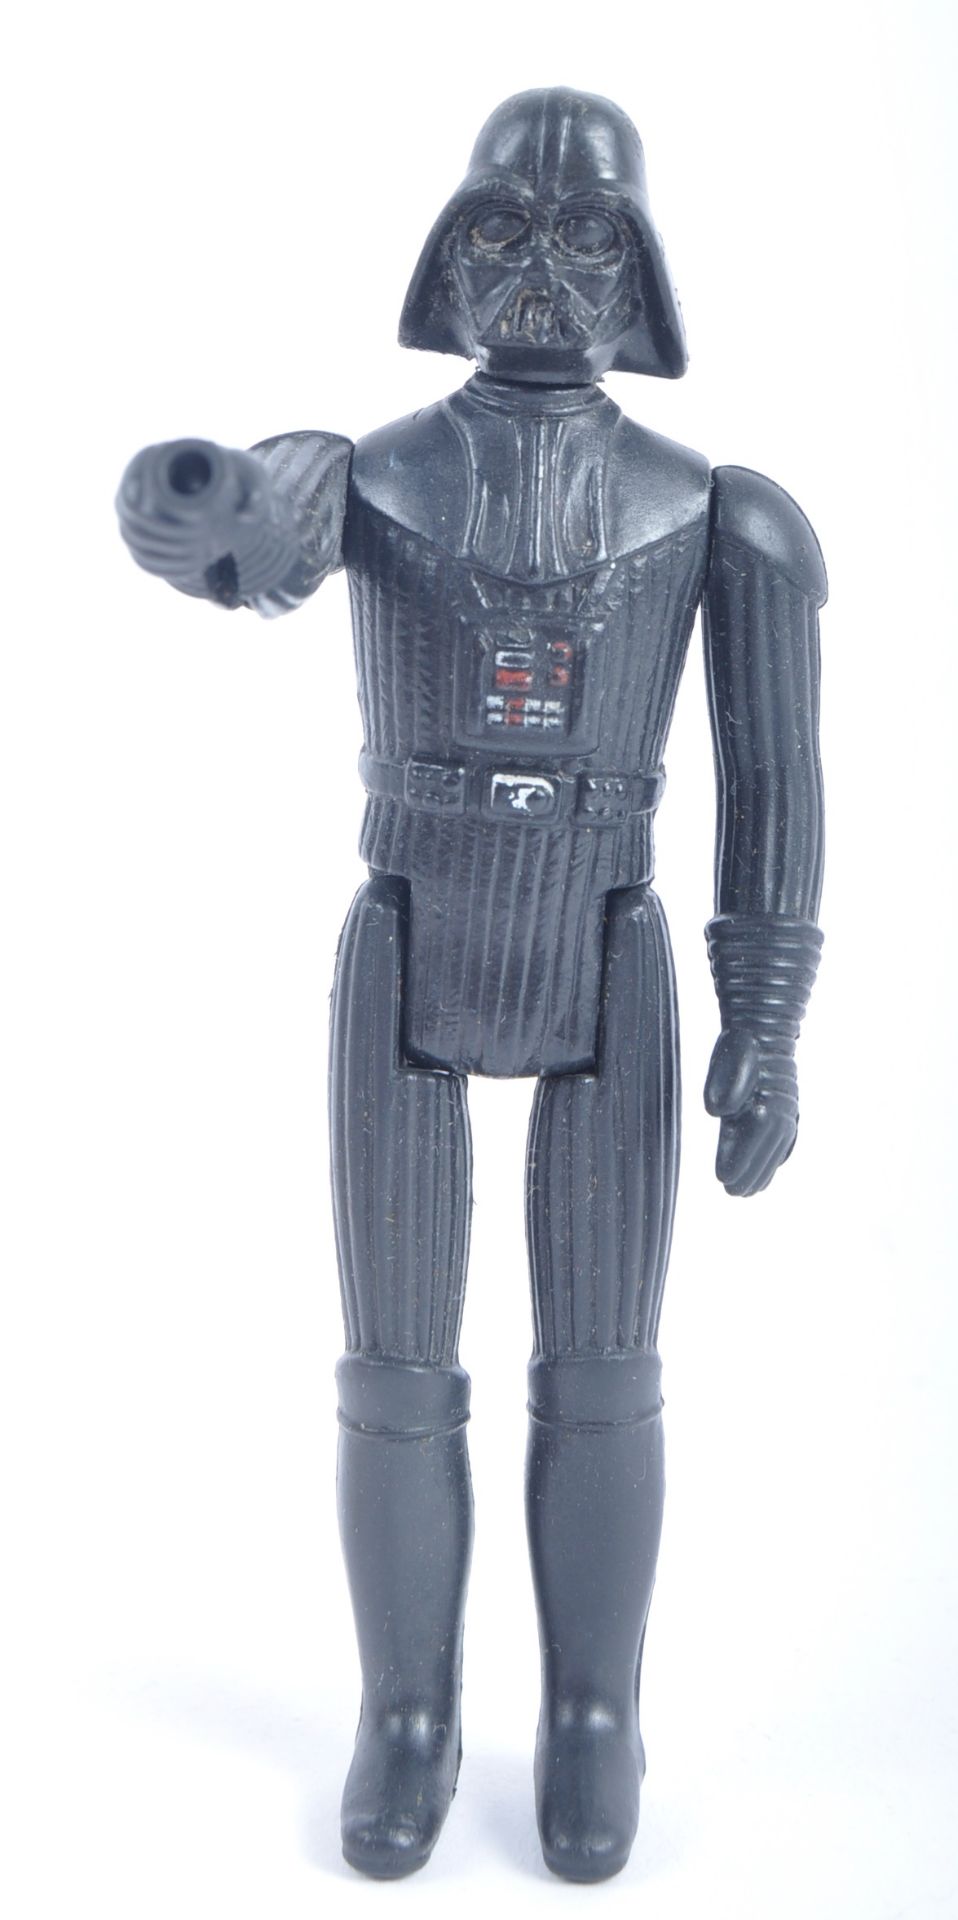 COLLECTION OF ORIGINAL MALITOY / KENNER STARWARS FIGURES - Image 3 of 6